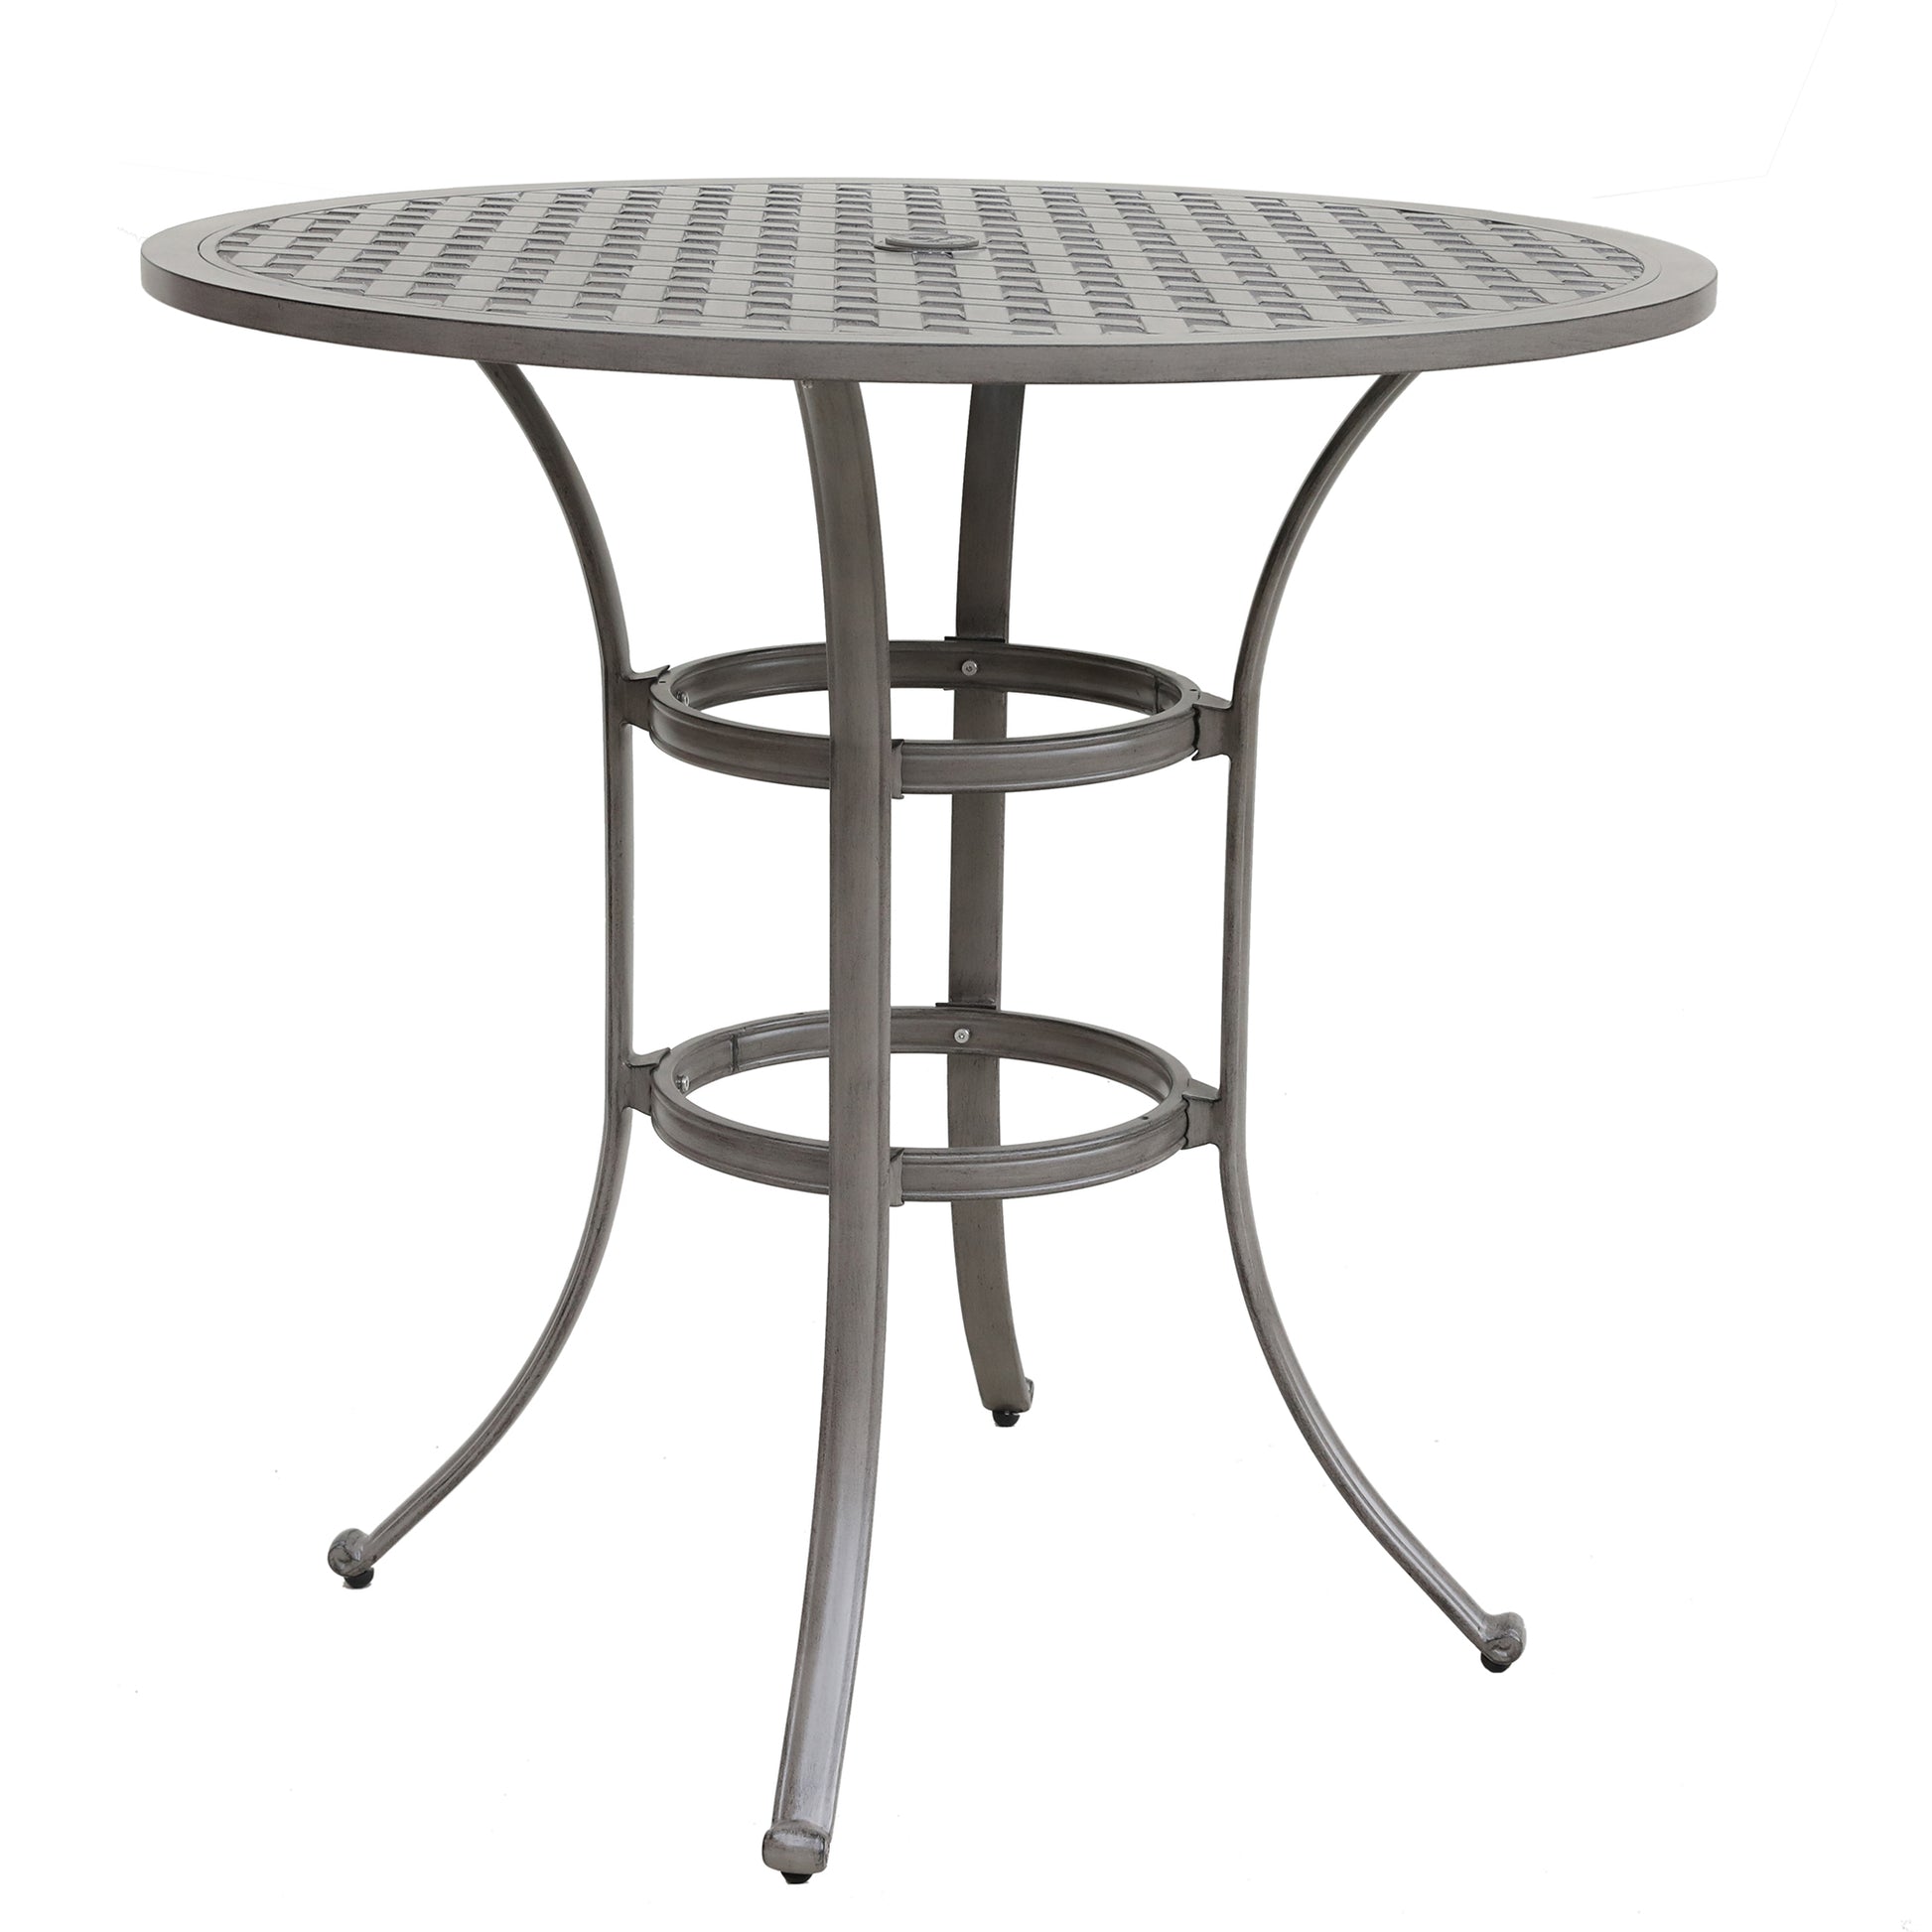 42 Inches Cast Aluminum Round Bar Table - Grey